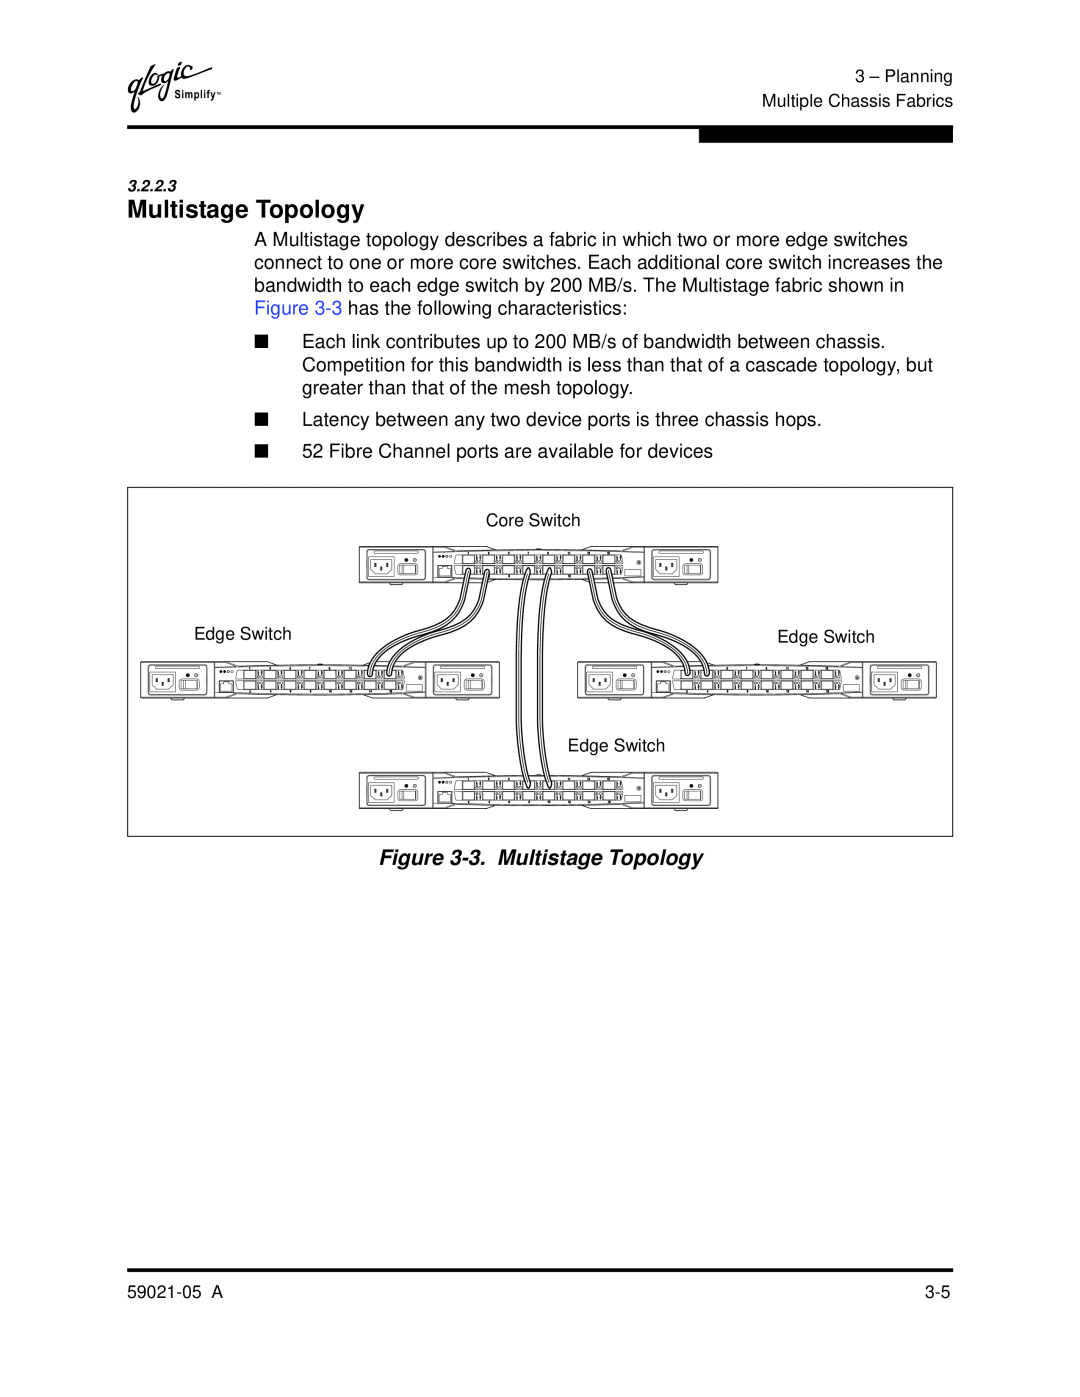 Q-Logic 59021-05 manual 3. Multistage Topology 